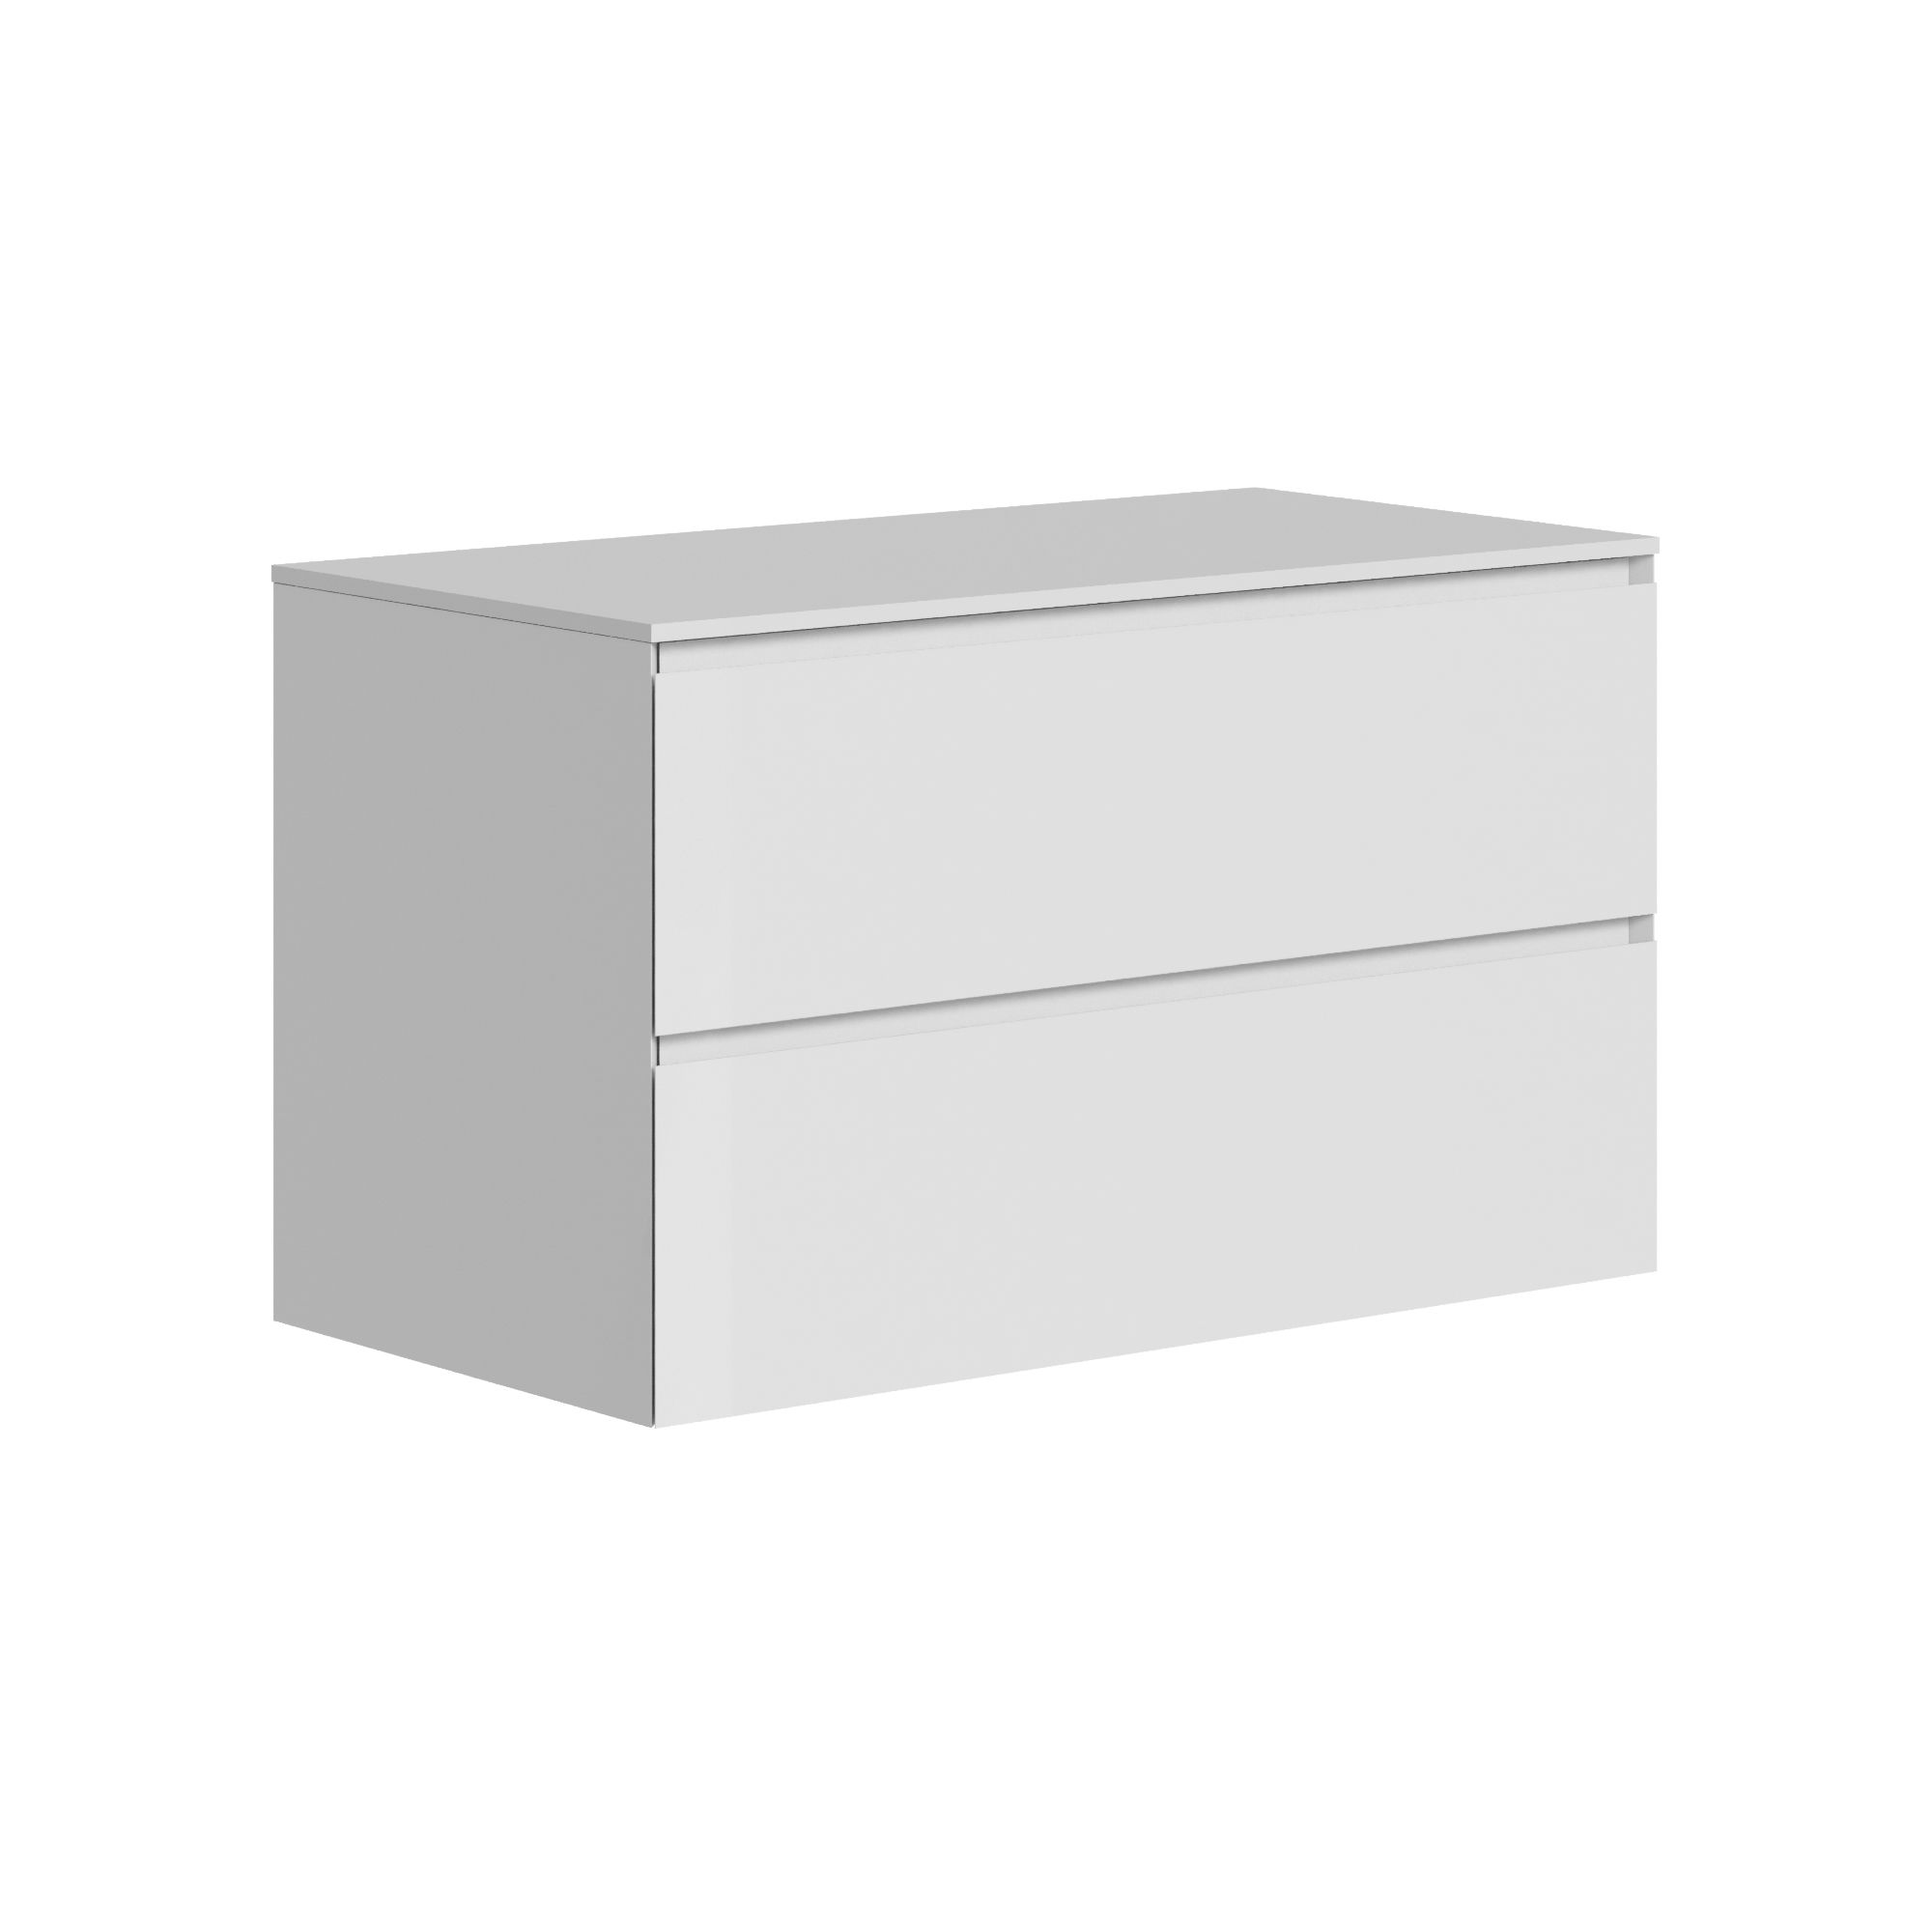 The Ellery Washbasin Pull Open Unit 900x520mm with Solid Surface Countertop